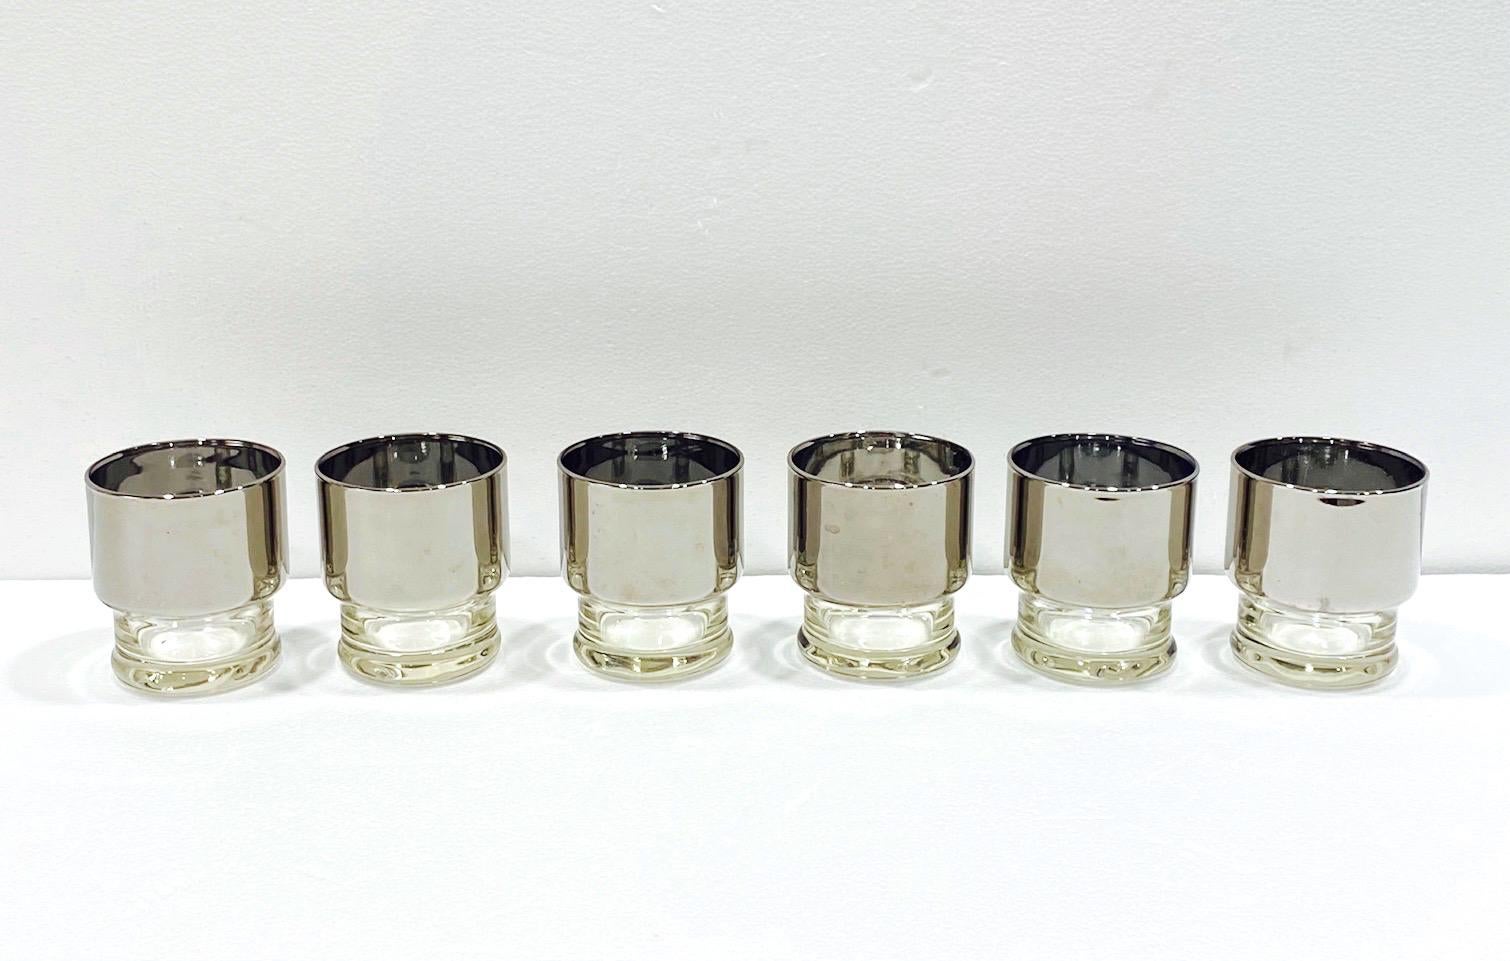 Hand-Crafted Set of Six Mid-Century Modern Silvered and Crystal Barware Glasses, c. 1960s